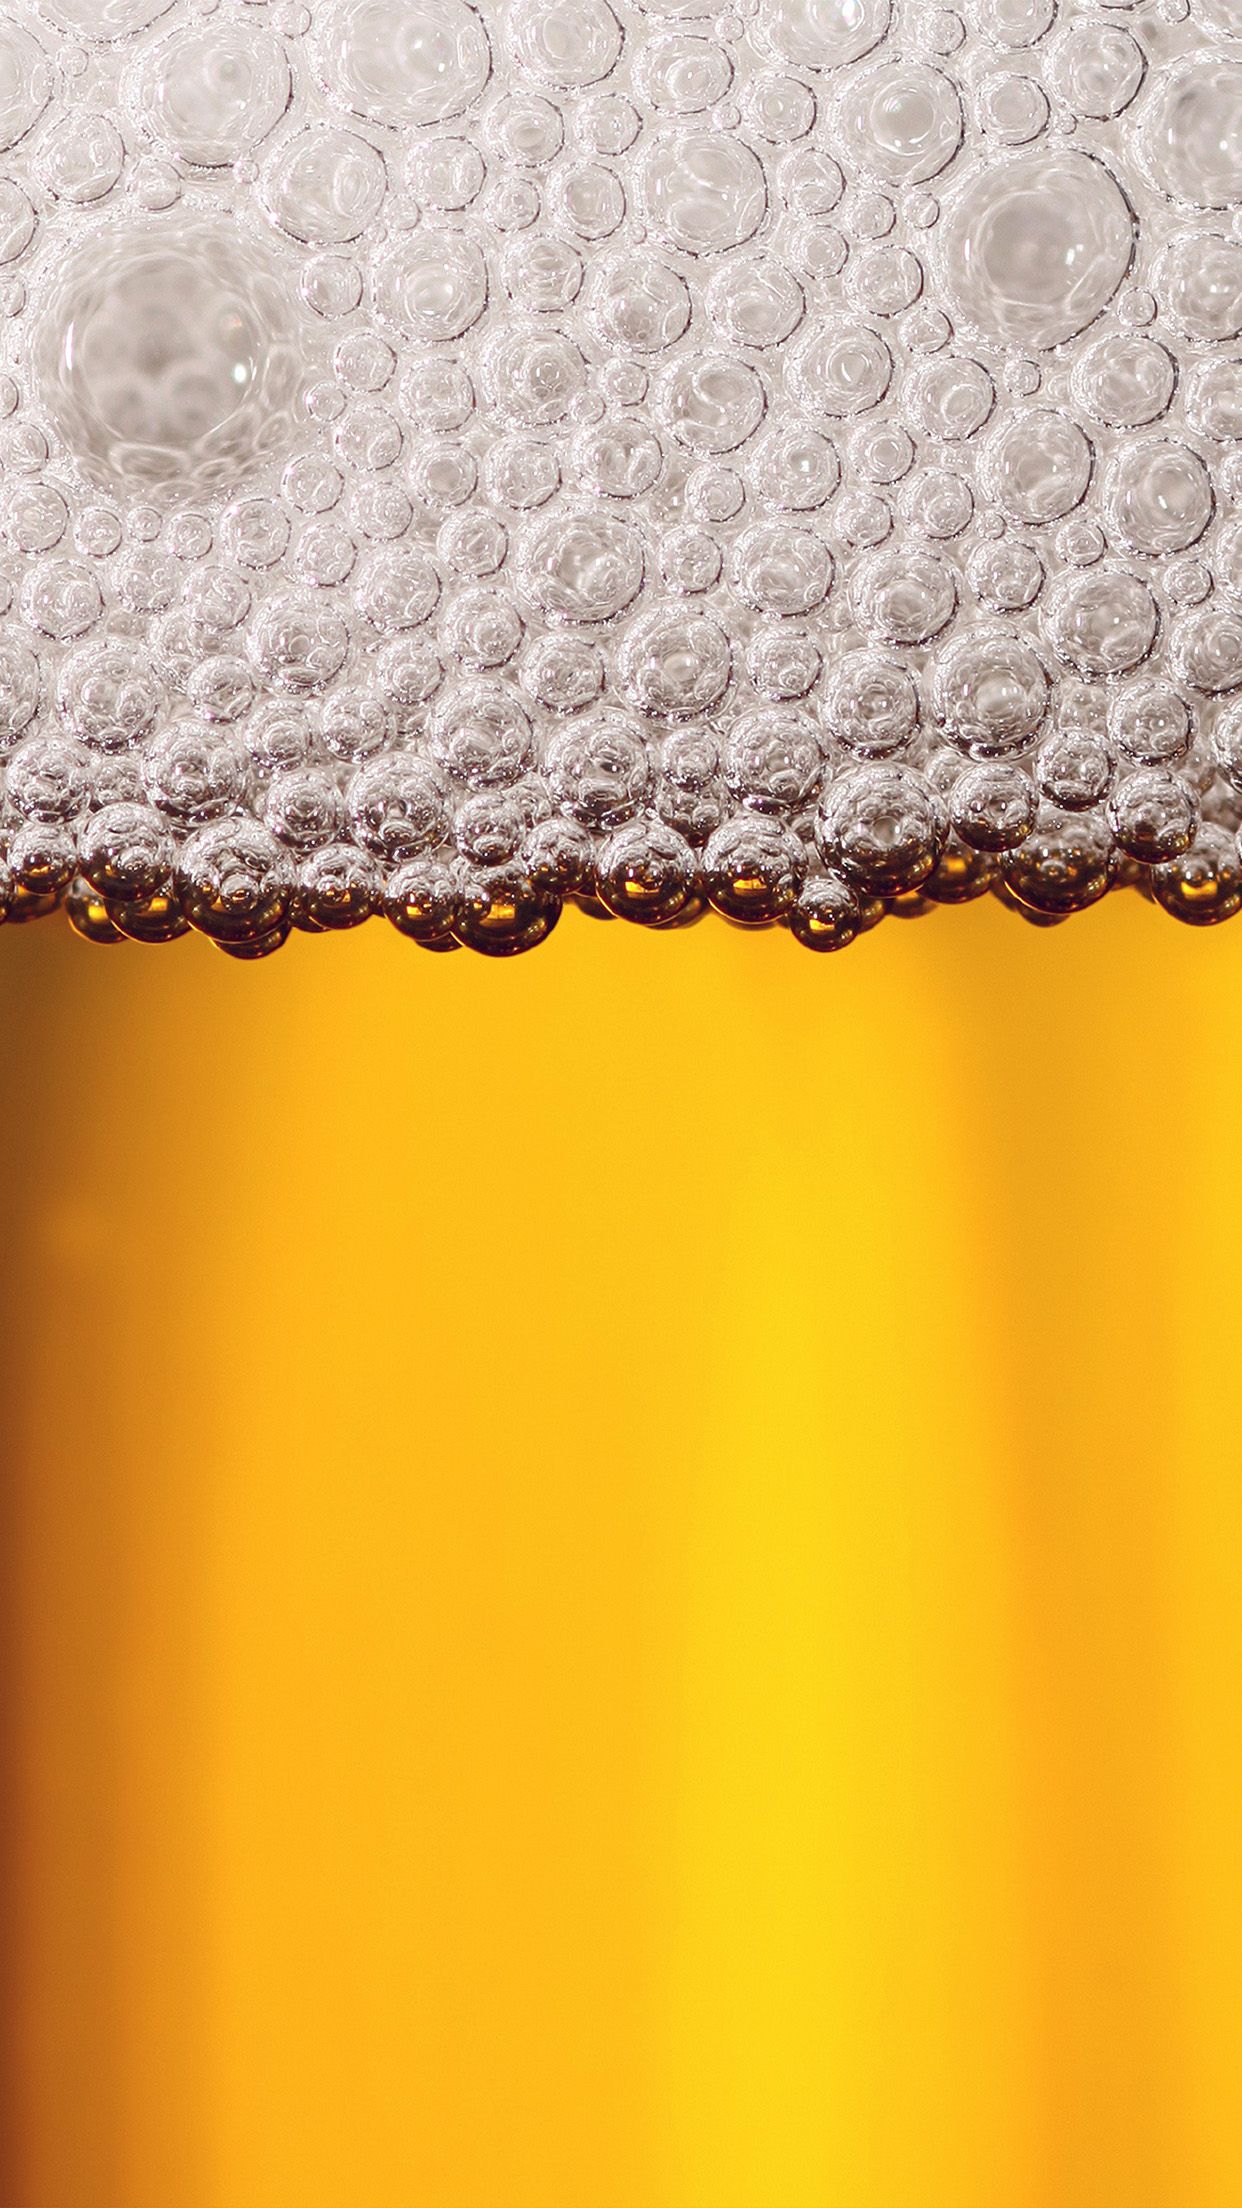 Glass Of Beer Foam Bubbles Close Up iPhone HD Wallpaper